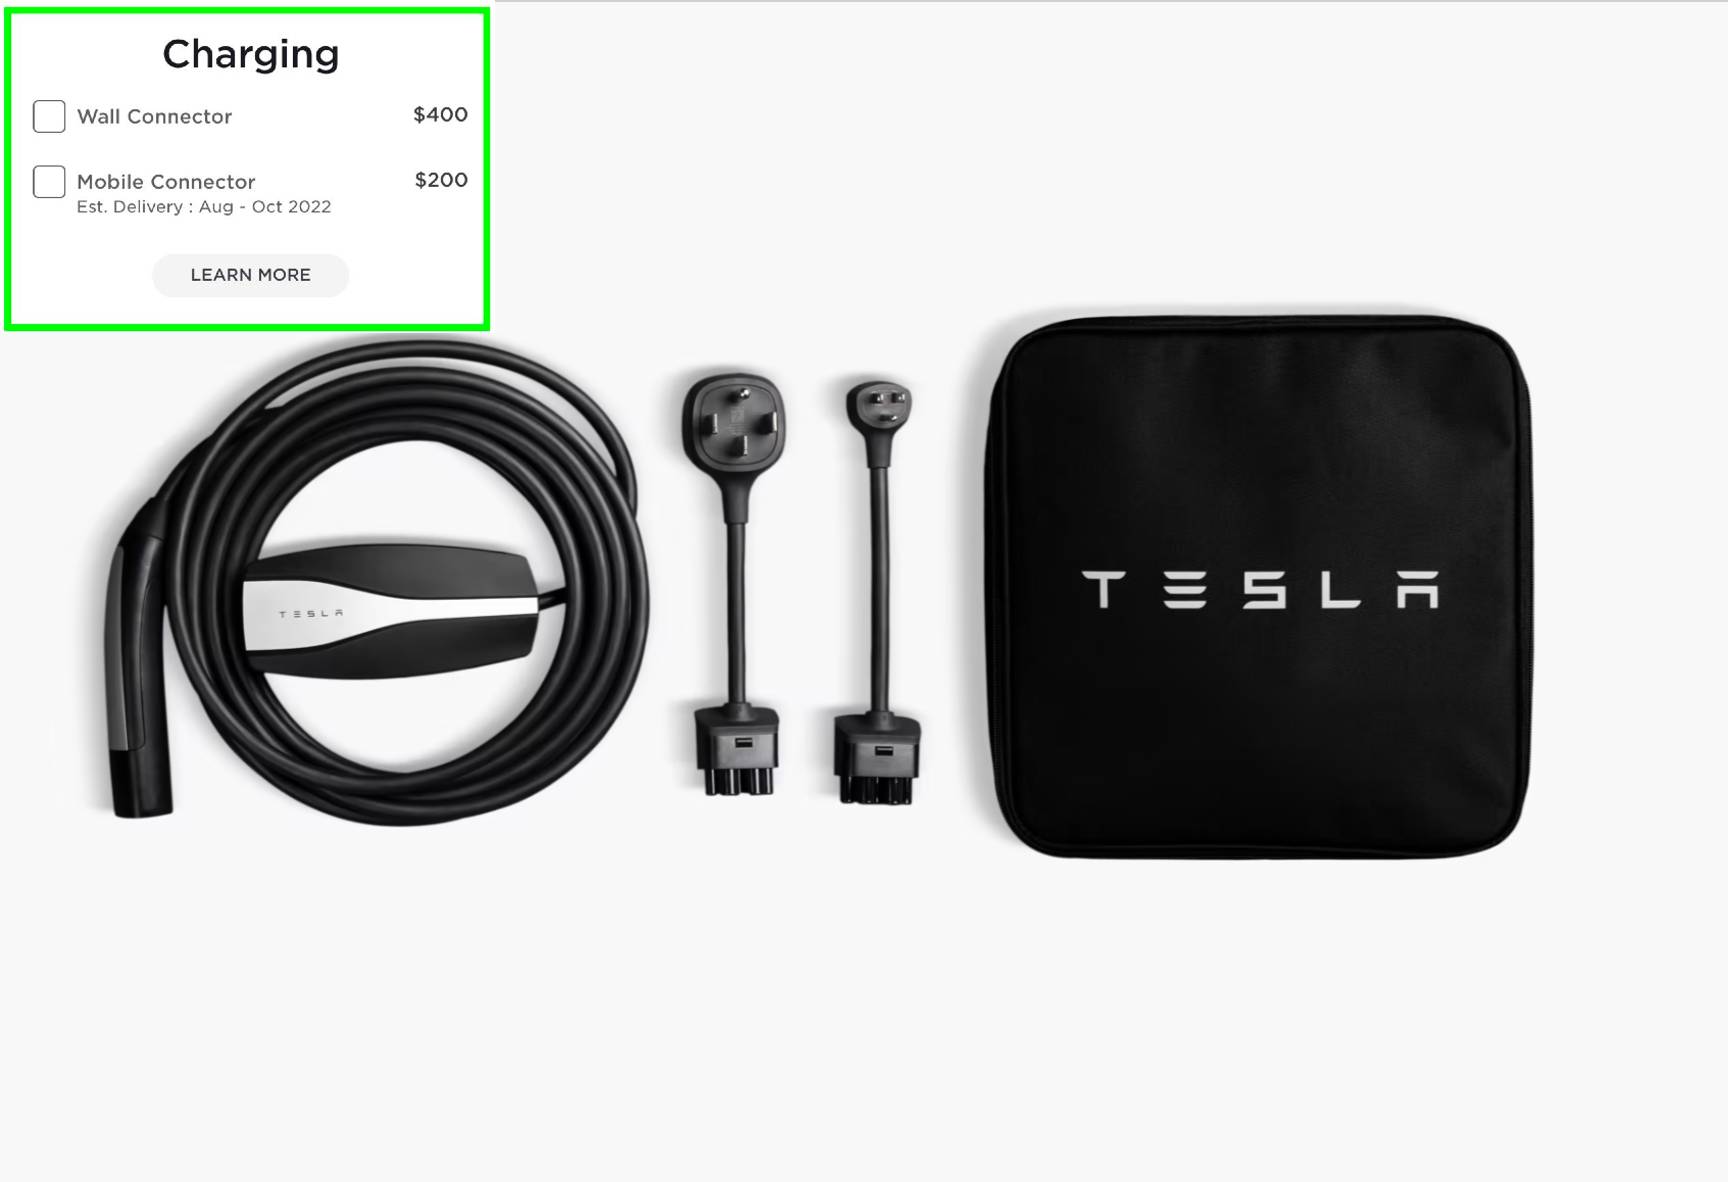 Tesla mobile charger now available for purchase with vehicle orders